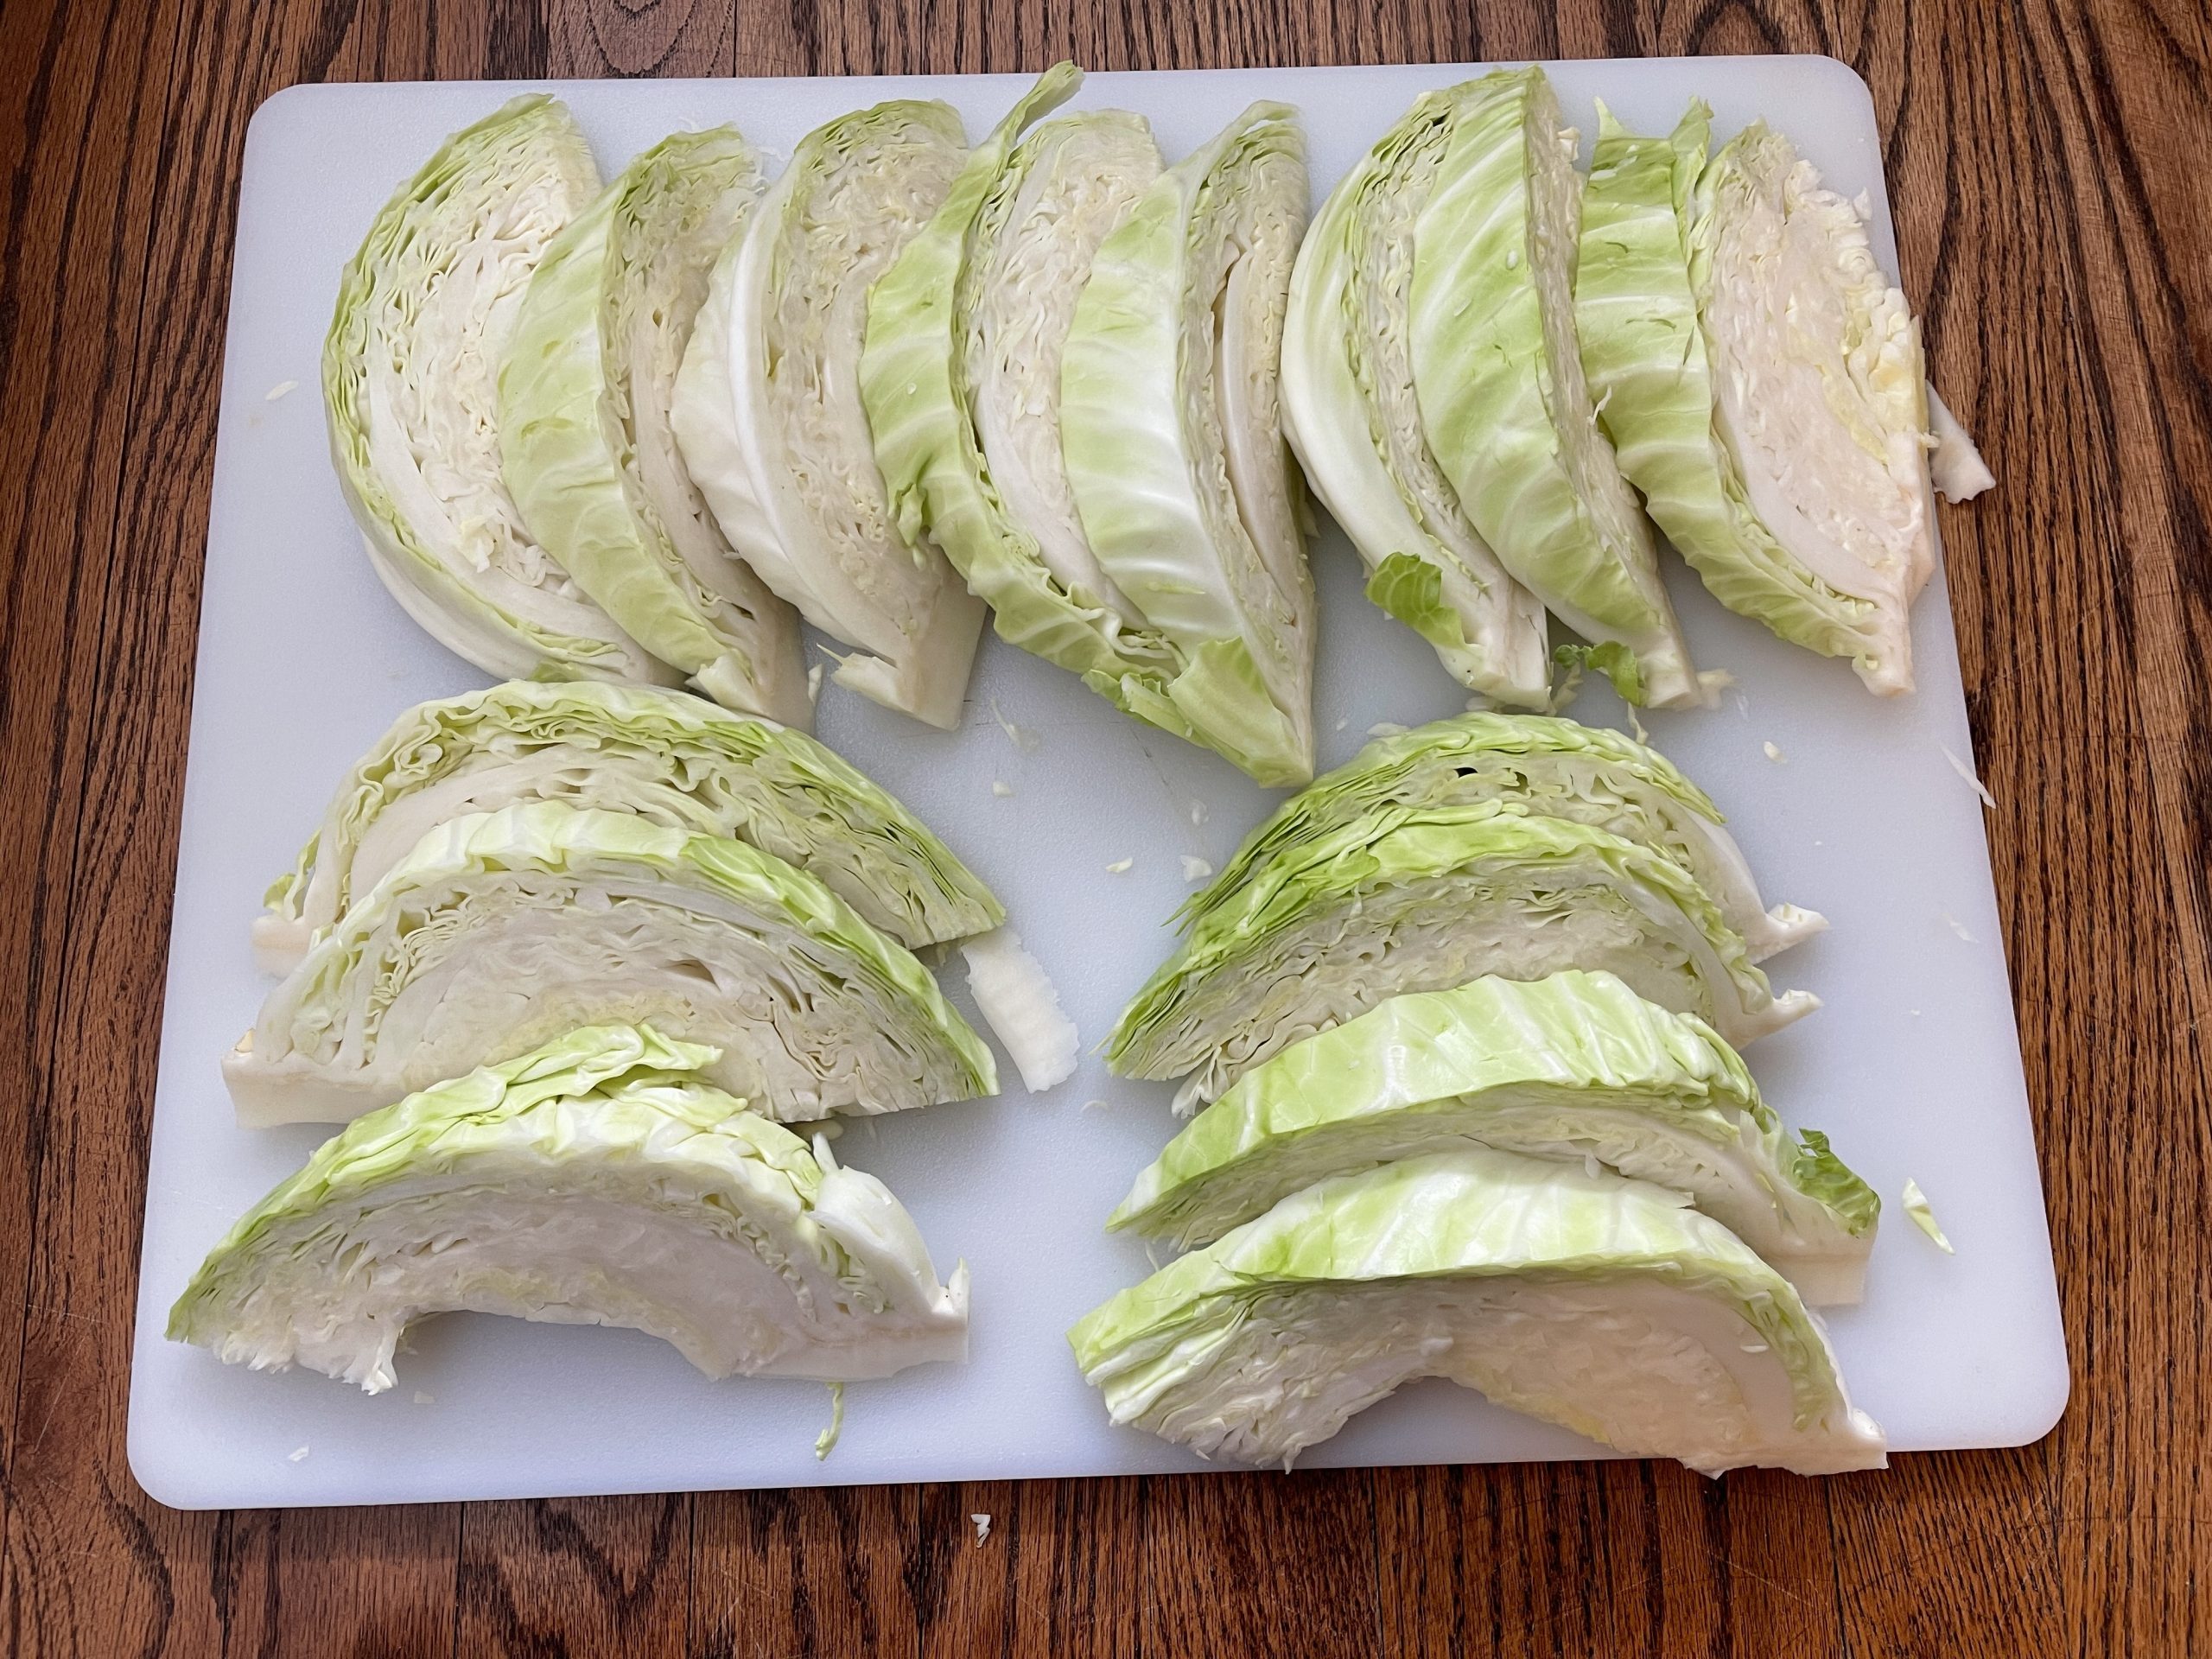 cut cabbage in quarters, and then cut each quarter into approx. thirds trying to make each wedge no more than 1 1/2" thick